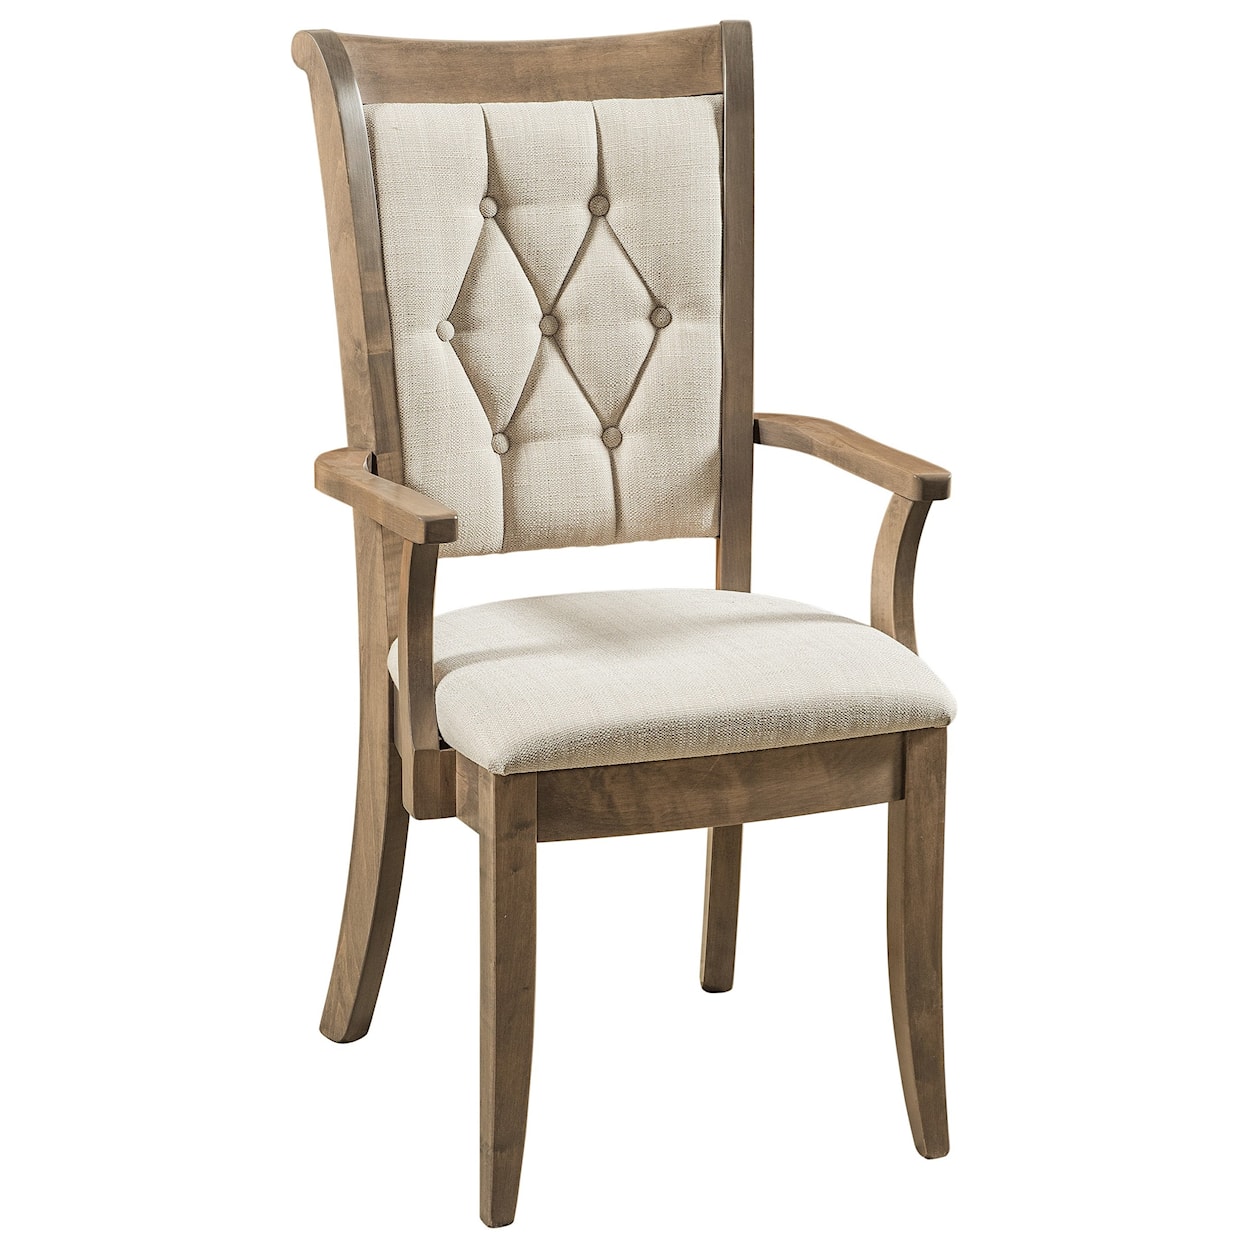 F&N Woodworking Chelsea Arm Chair - Fabric Seat